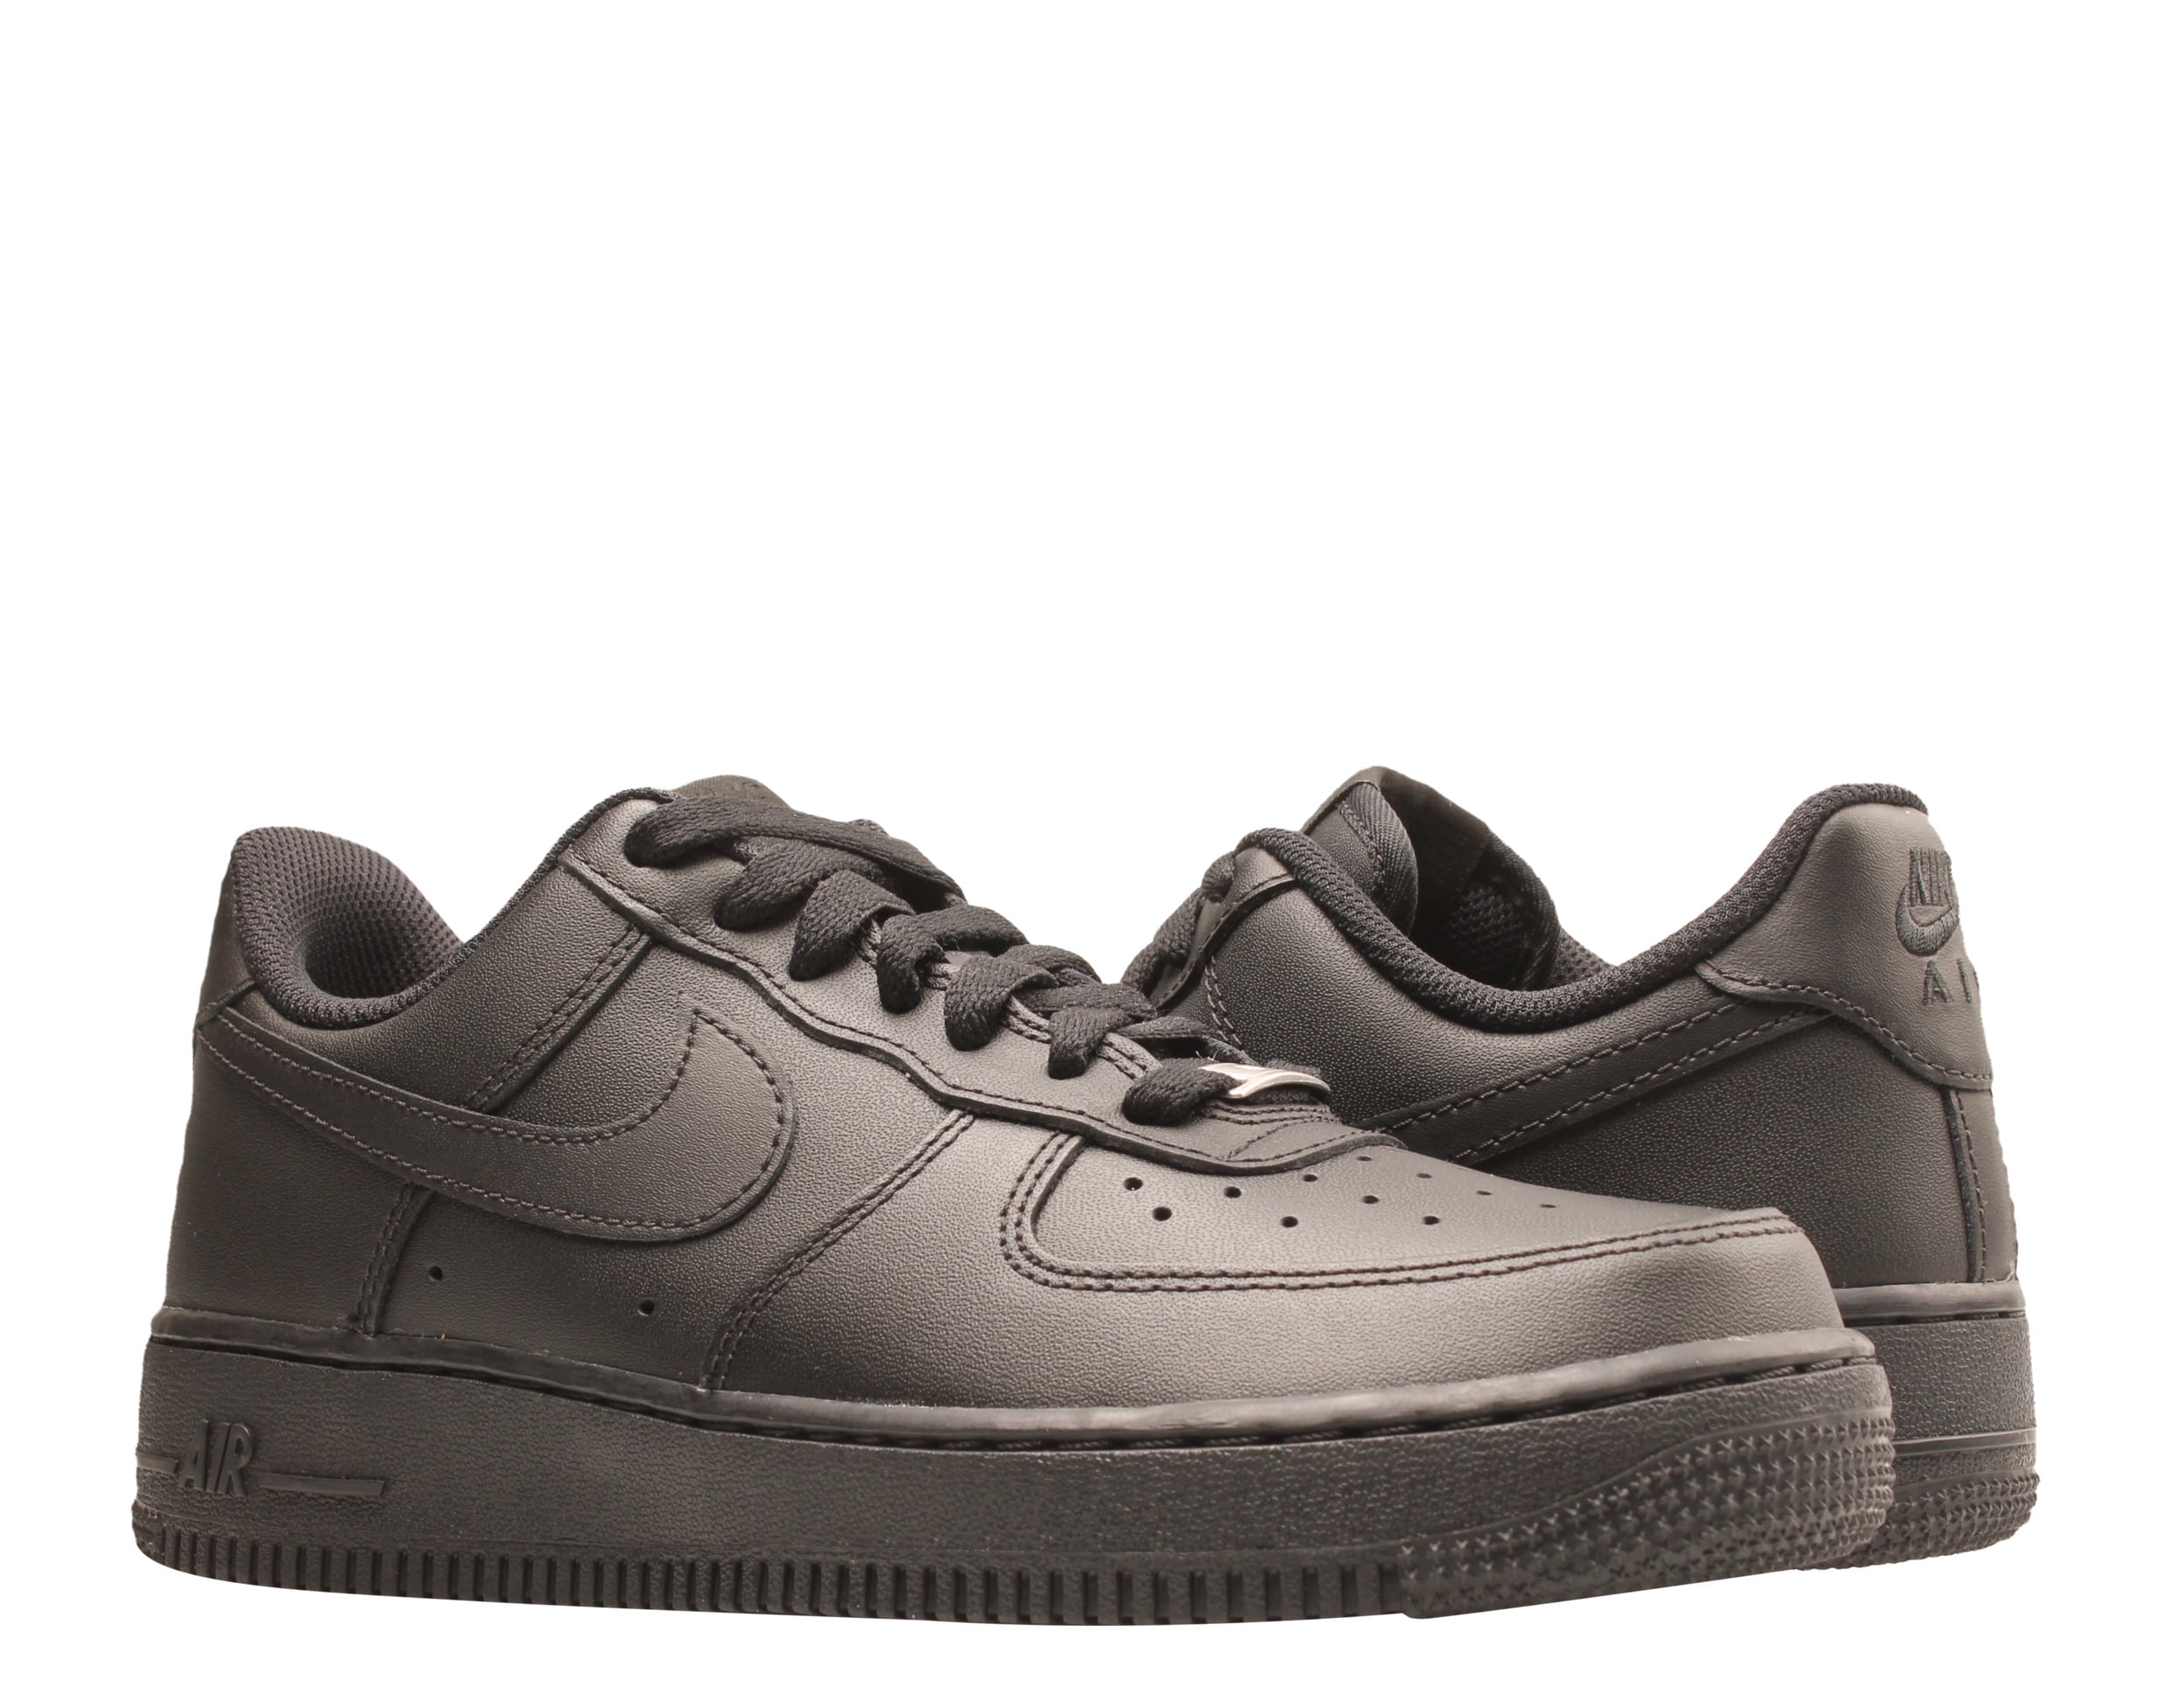 nike air force 1 size 7.5